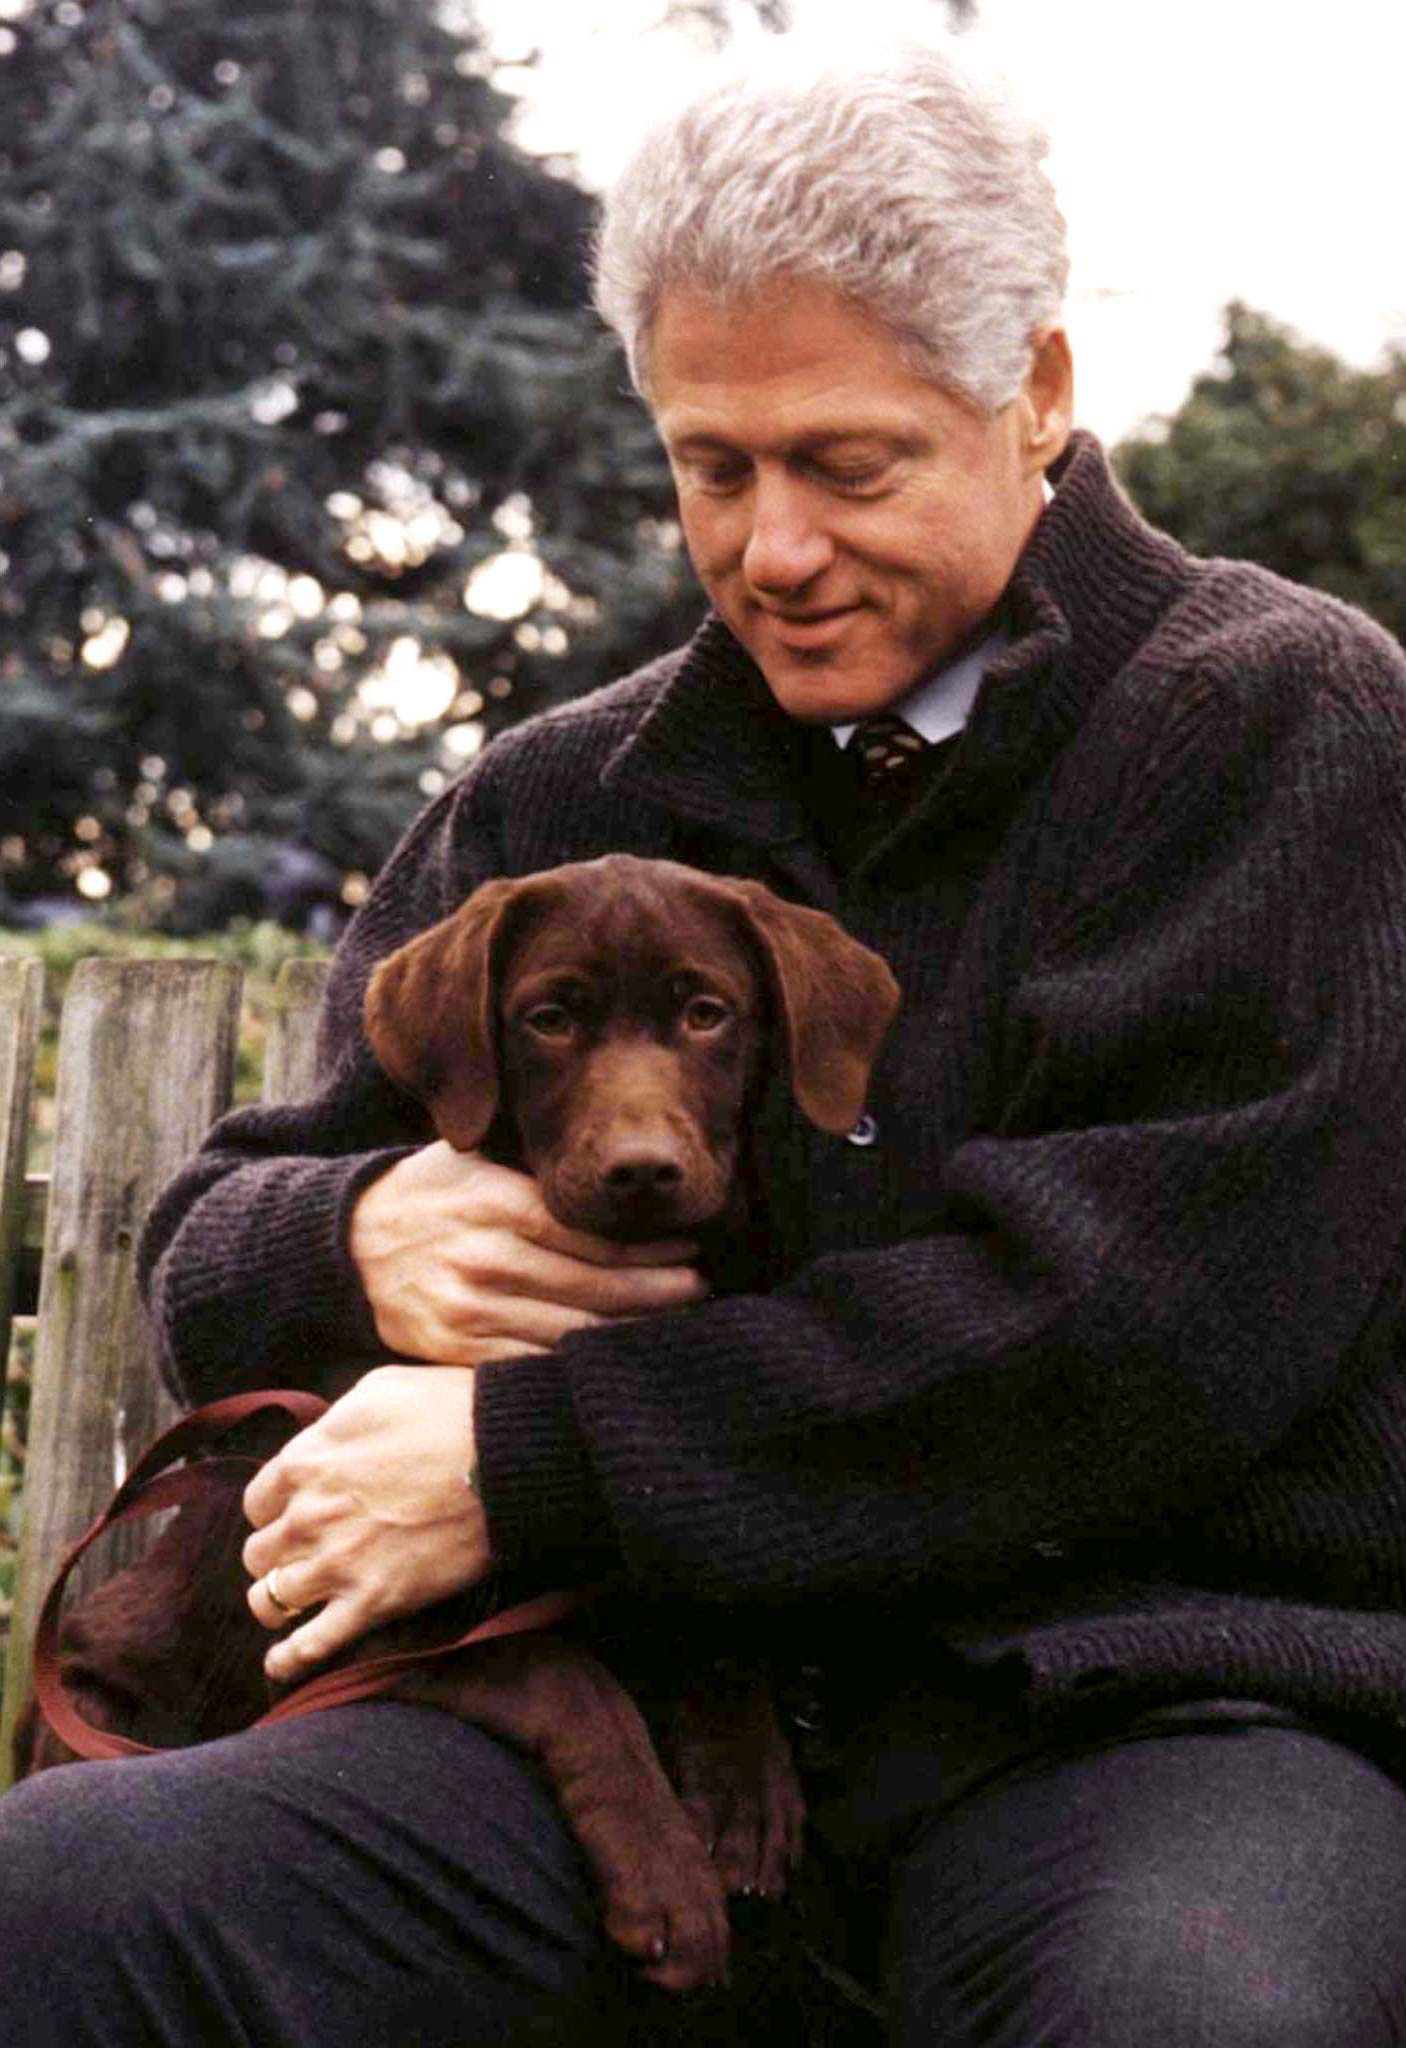 CLINTON HOLDS NEW LABRADOR PUPPY